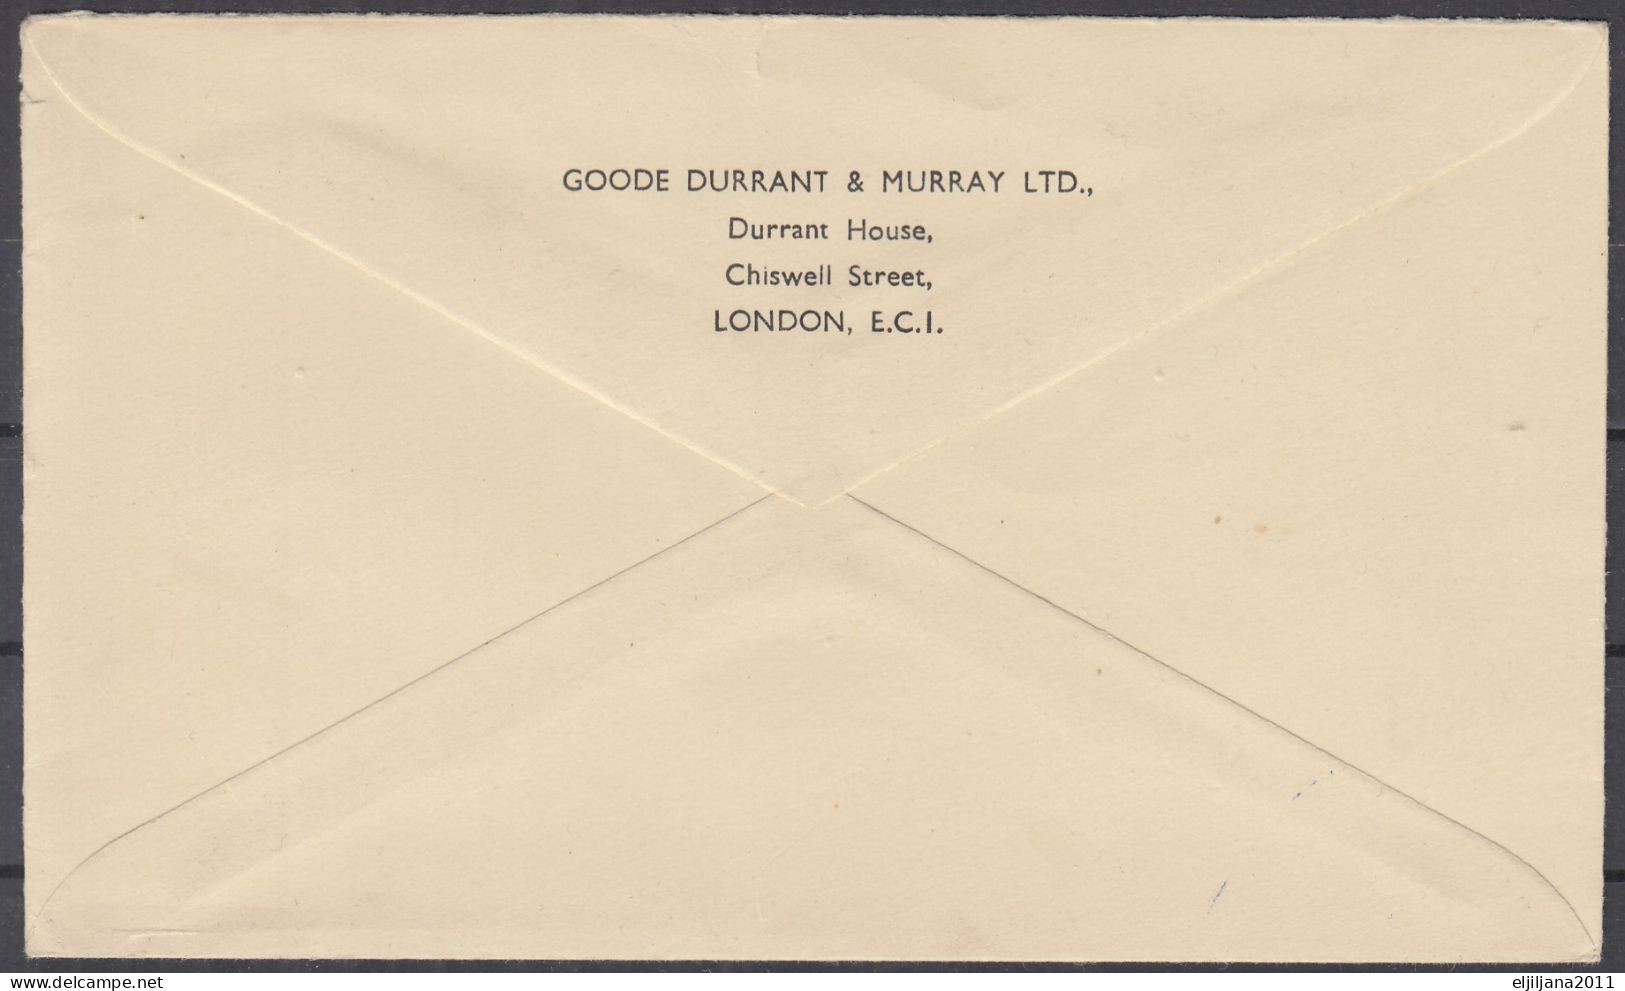 Great Britain - GB / UK 1958 ⁕ Post Paid Cover London To Austria Vienna 1 ⁕ See Scan - Franking Machines (EMA)